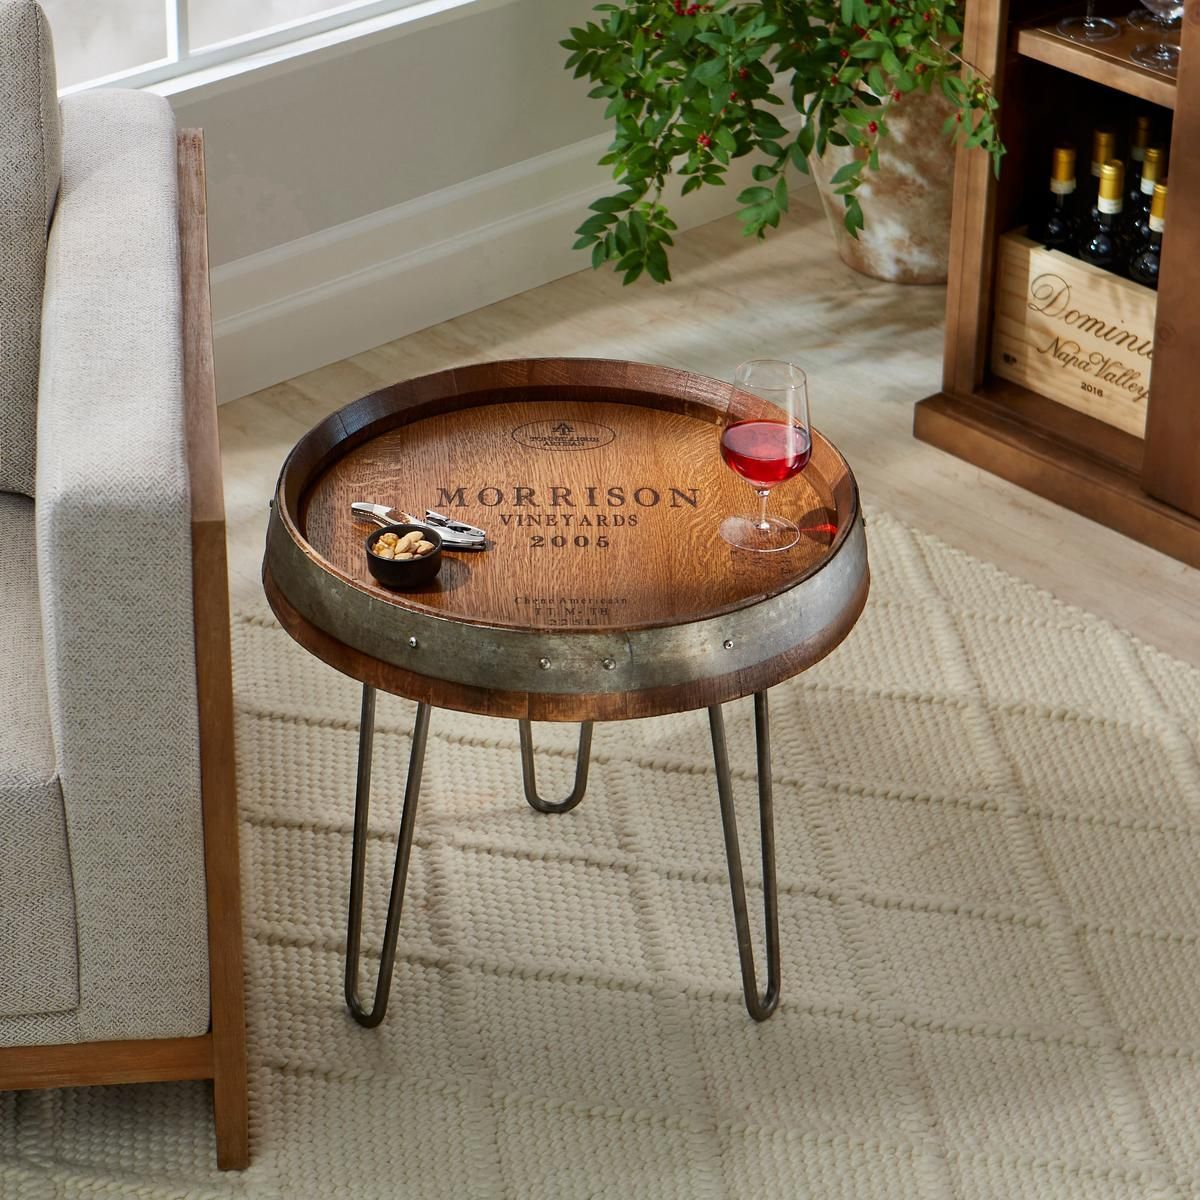 Add some wine country charm to your home with our #wine barrel head end table —a statement piece crafted from reclaimed wine barrels. Personalize it to make it uniquely yours! 🍷

Shop it here 👉️ enth.to/4ba0cW1